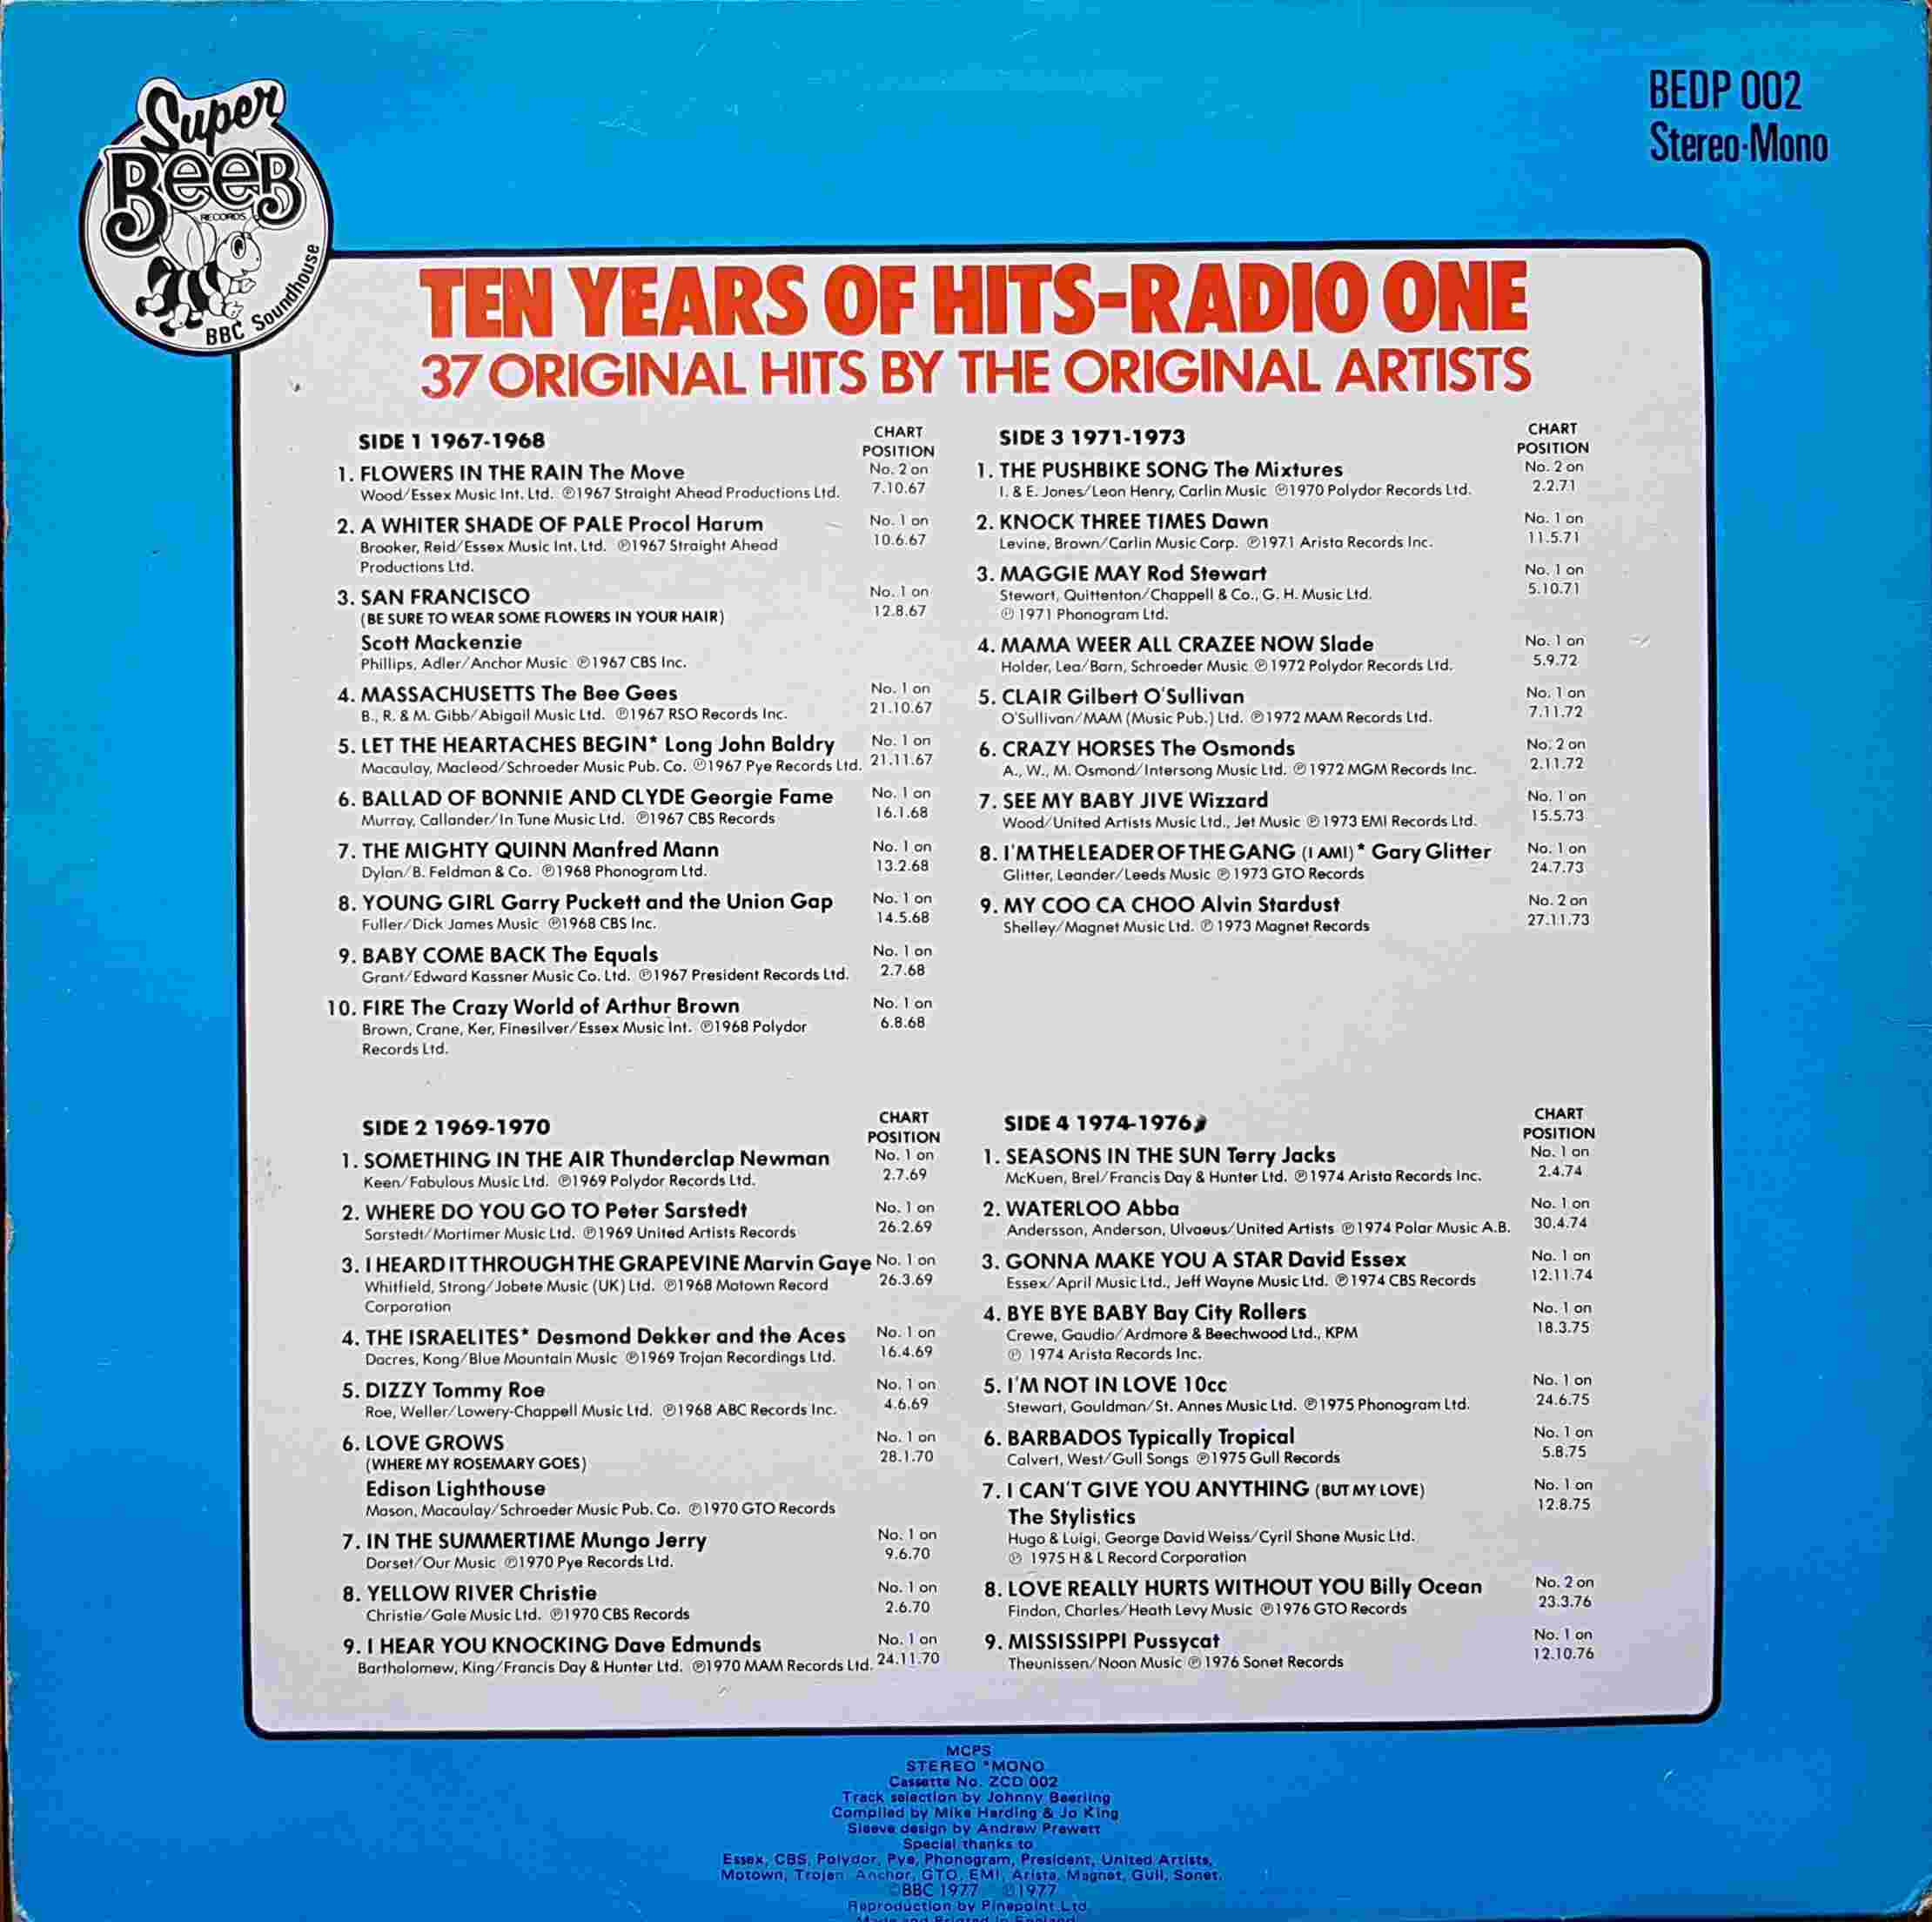 Picture of BEDP 002 10 years of hits - Radio 1 volume 1 by artist Various from the BBC records and Tapes library